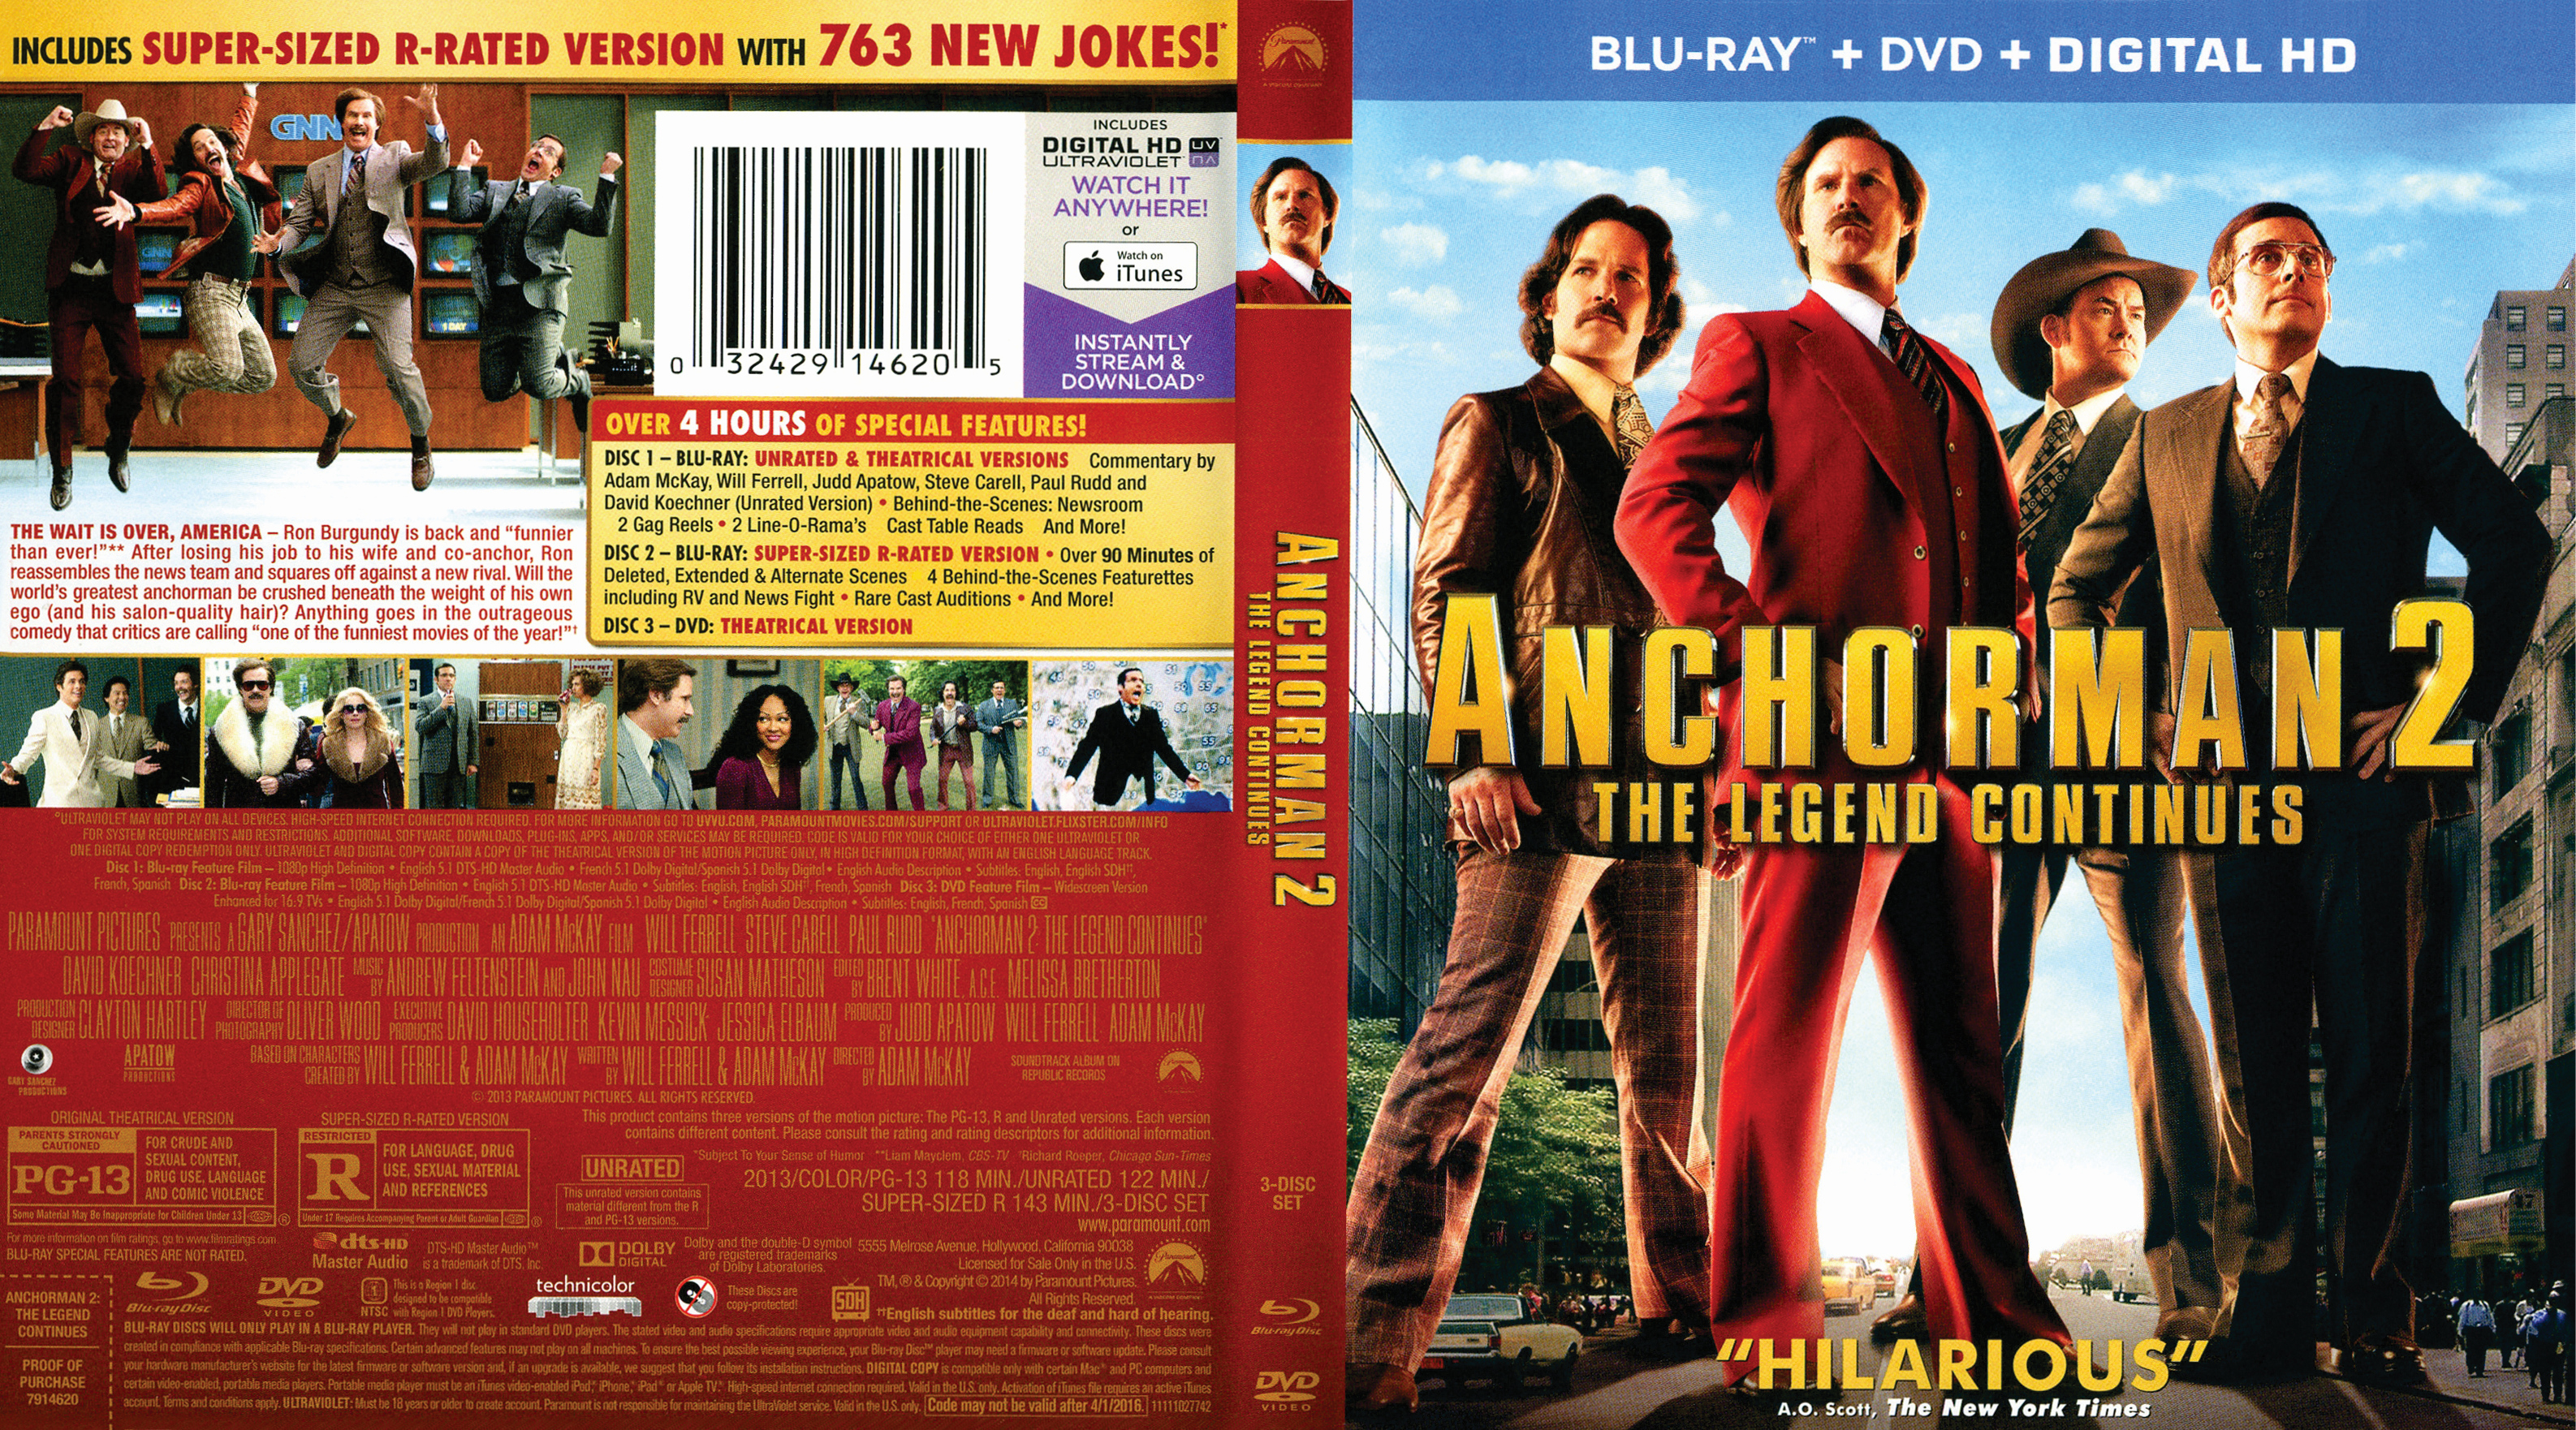 Jaquette DVD Anchorman 2 Zone 1 (BLU-RAY)